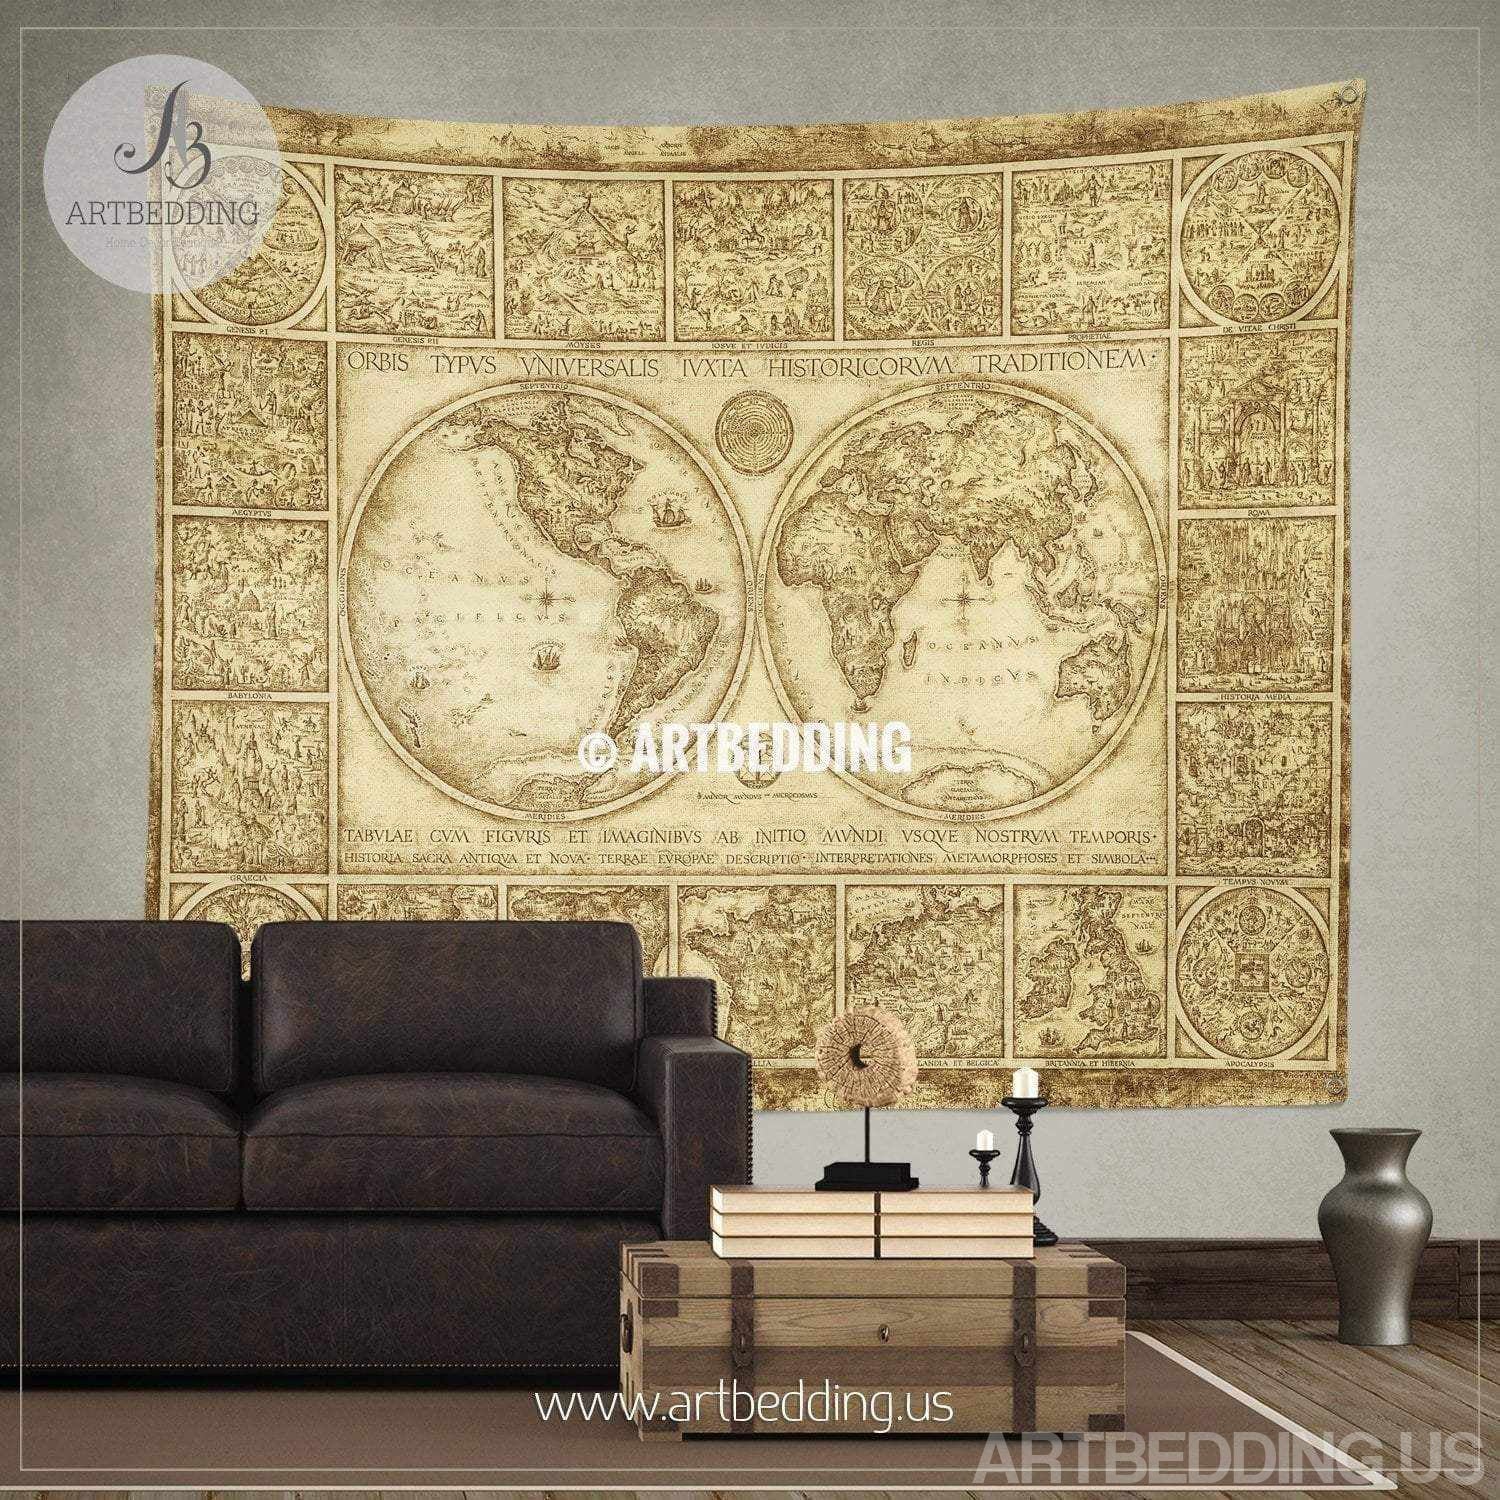 Vintage World Map Wall Tapestry Old World Map Wall Hanging Artbedding 0250